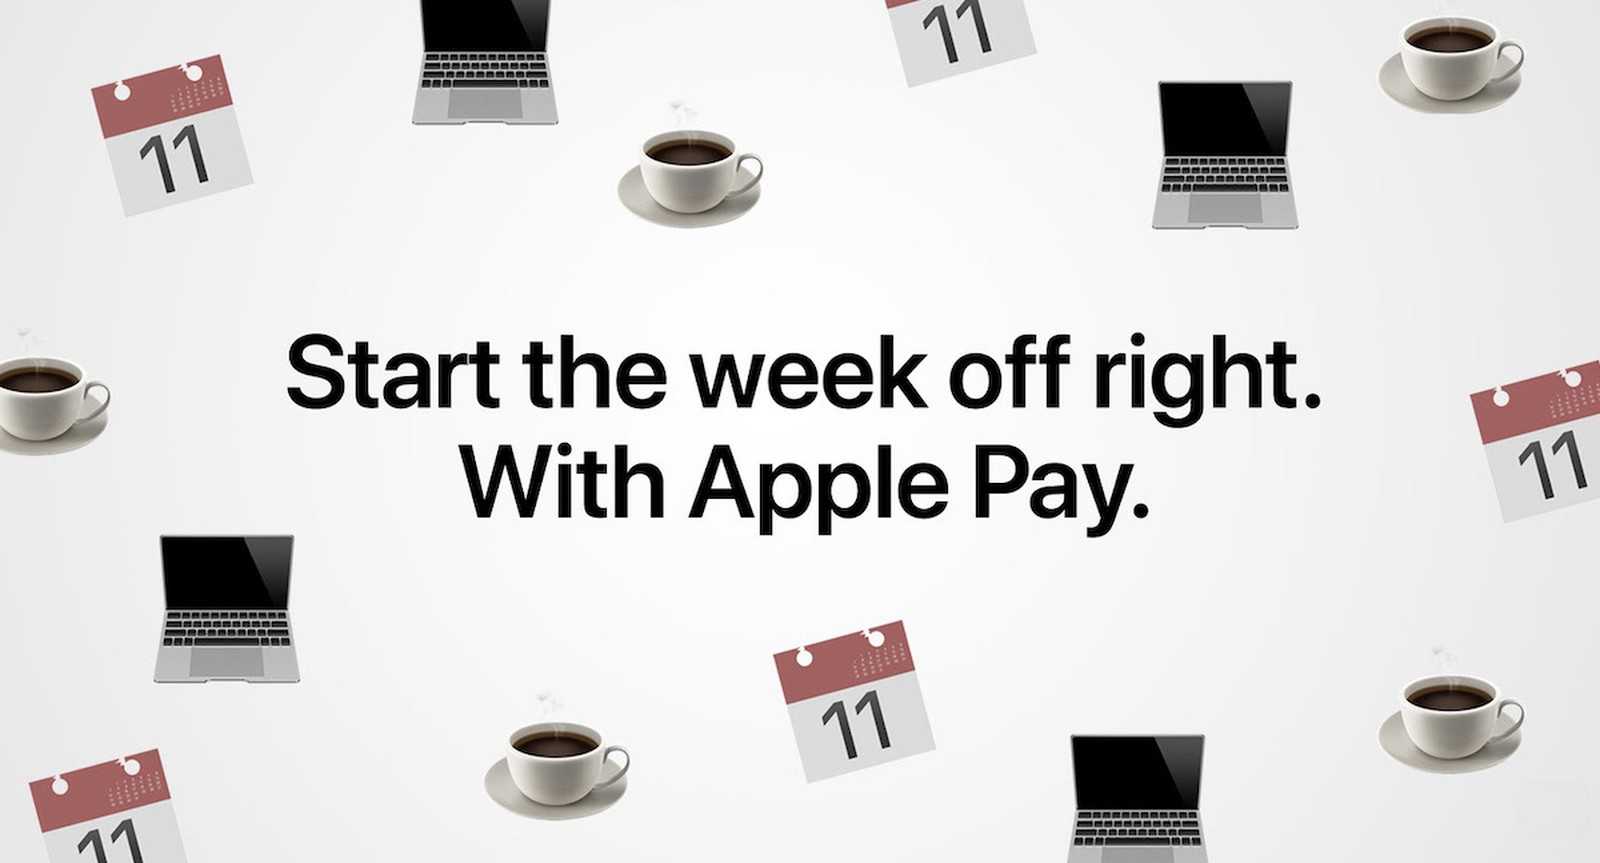 Apple Pay Promo Offers $2 Off Future Order at Panera Bread